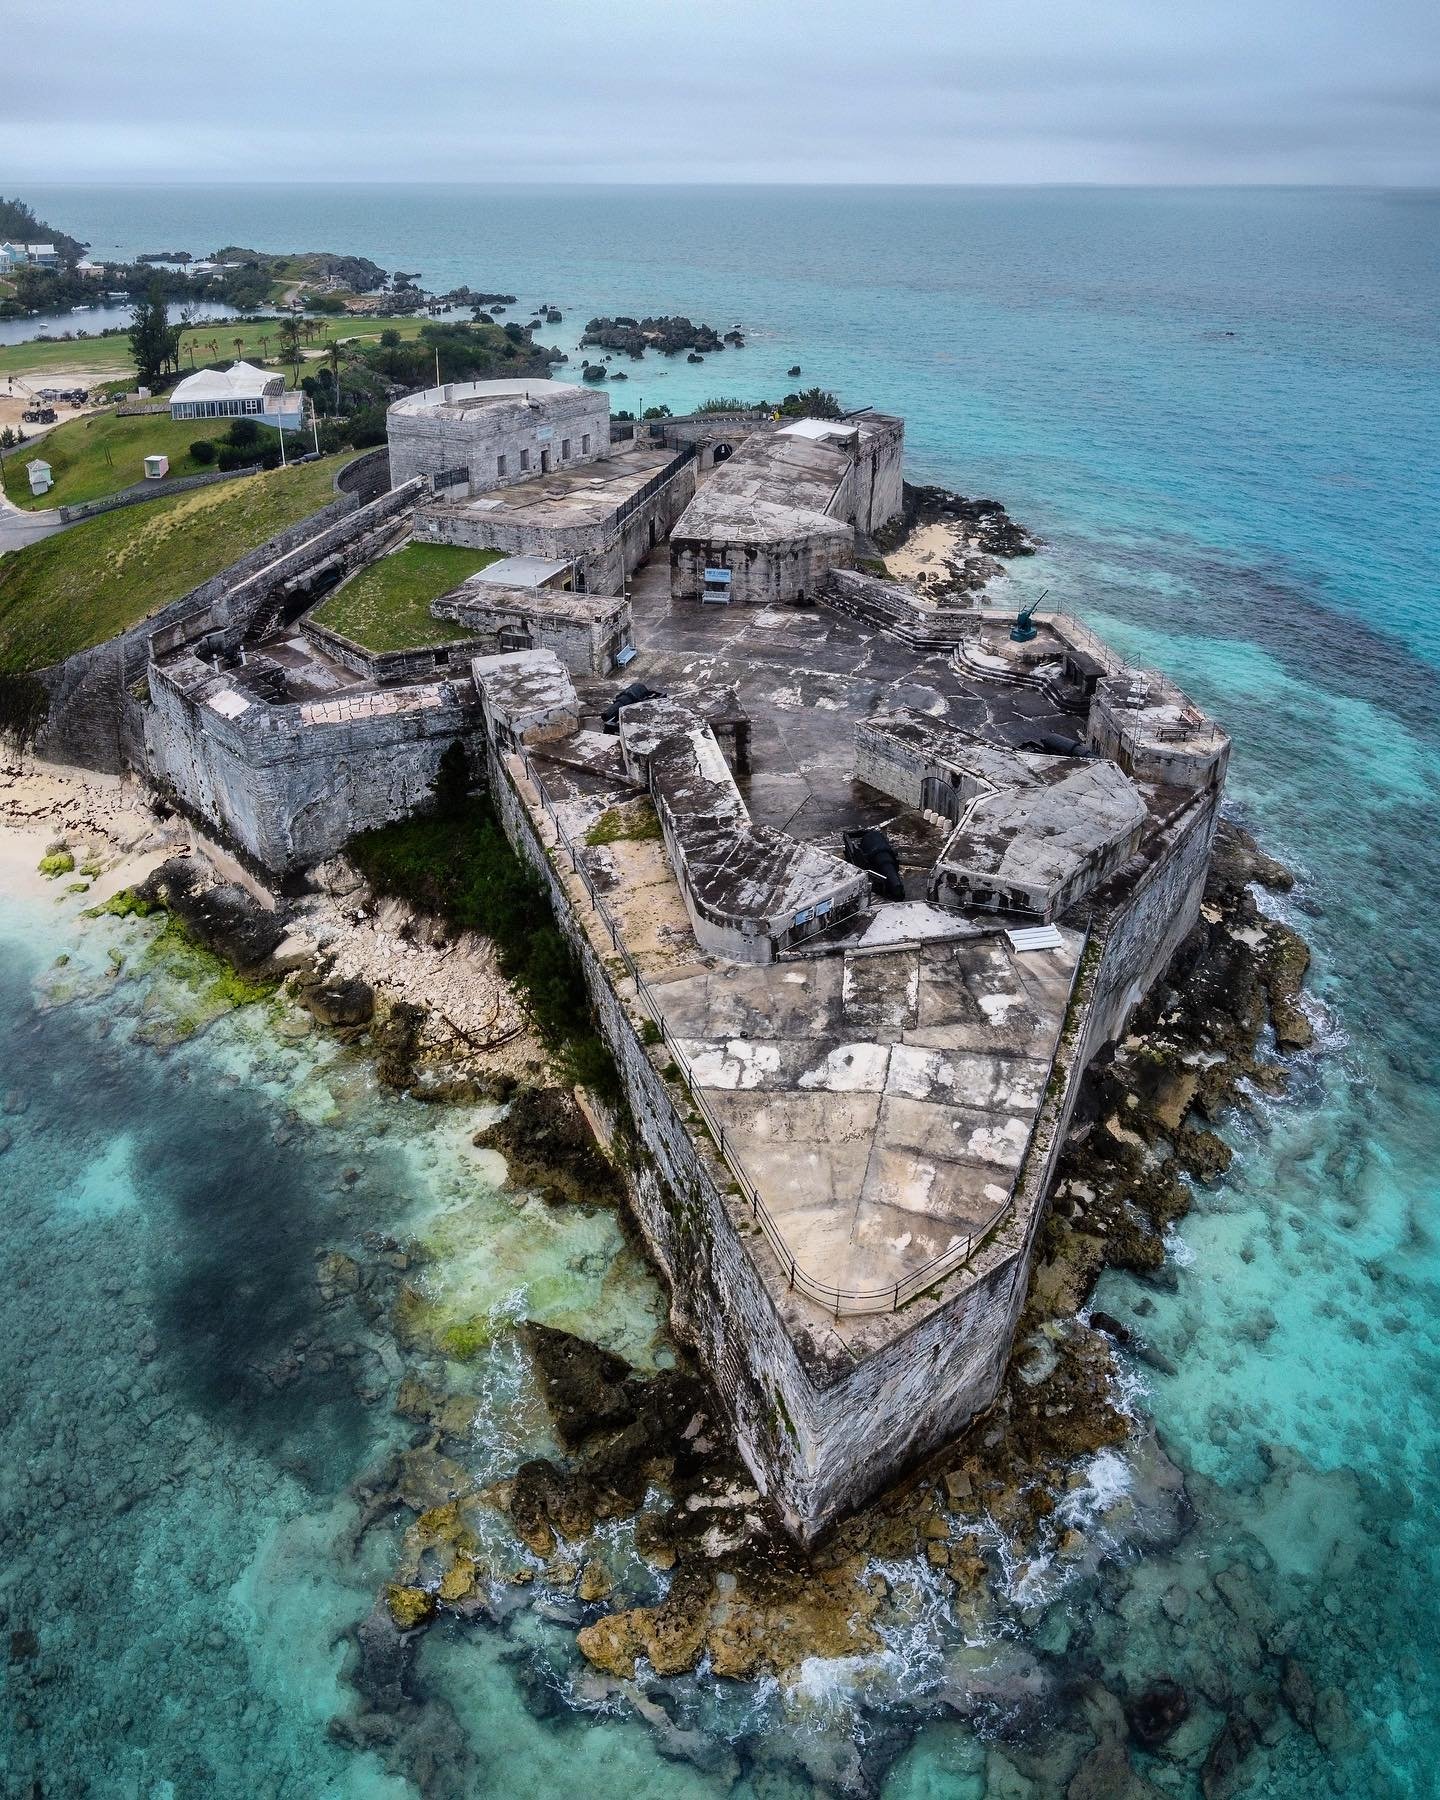 An aerial view of Fort St. Catherine in Bermuda